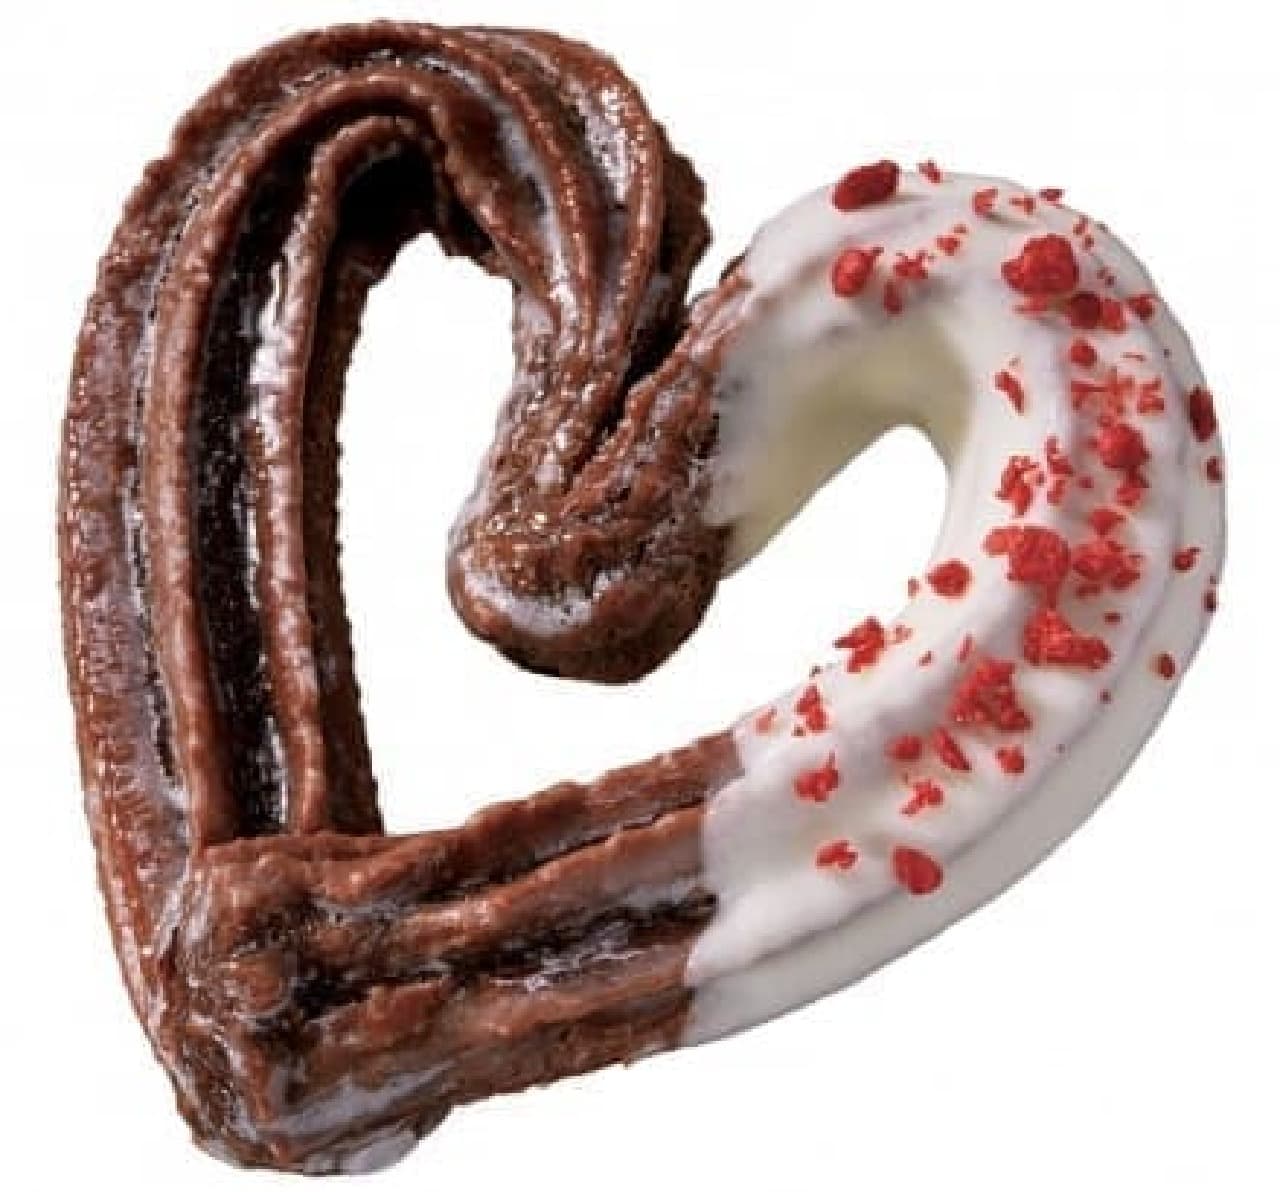 Mister Donut "Chocolat Collection"